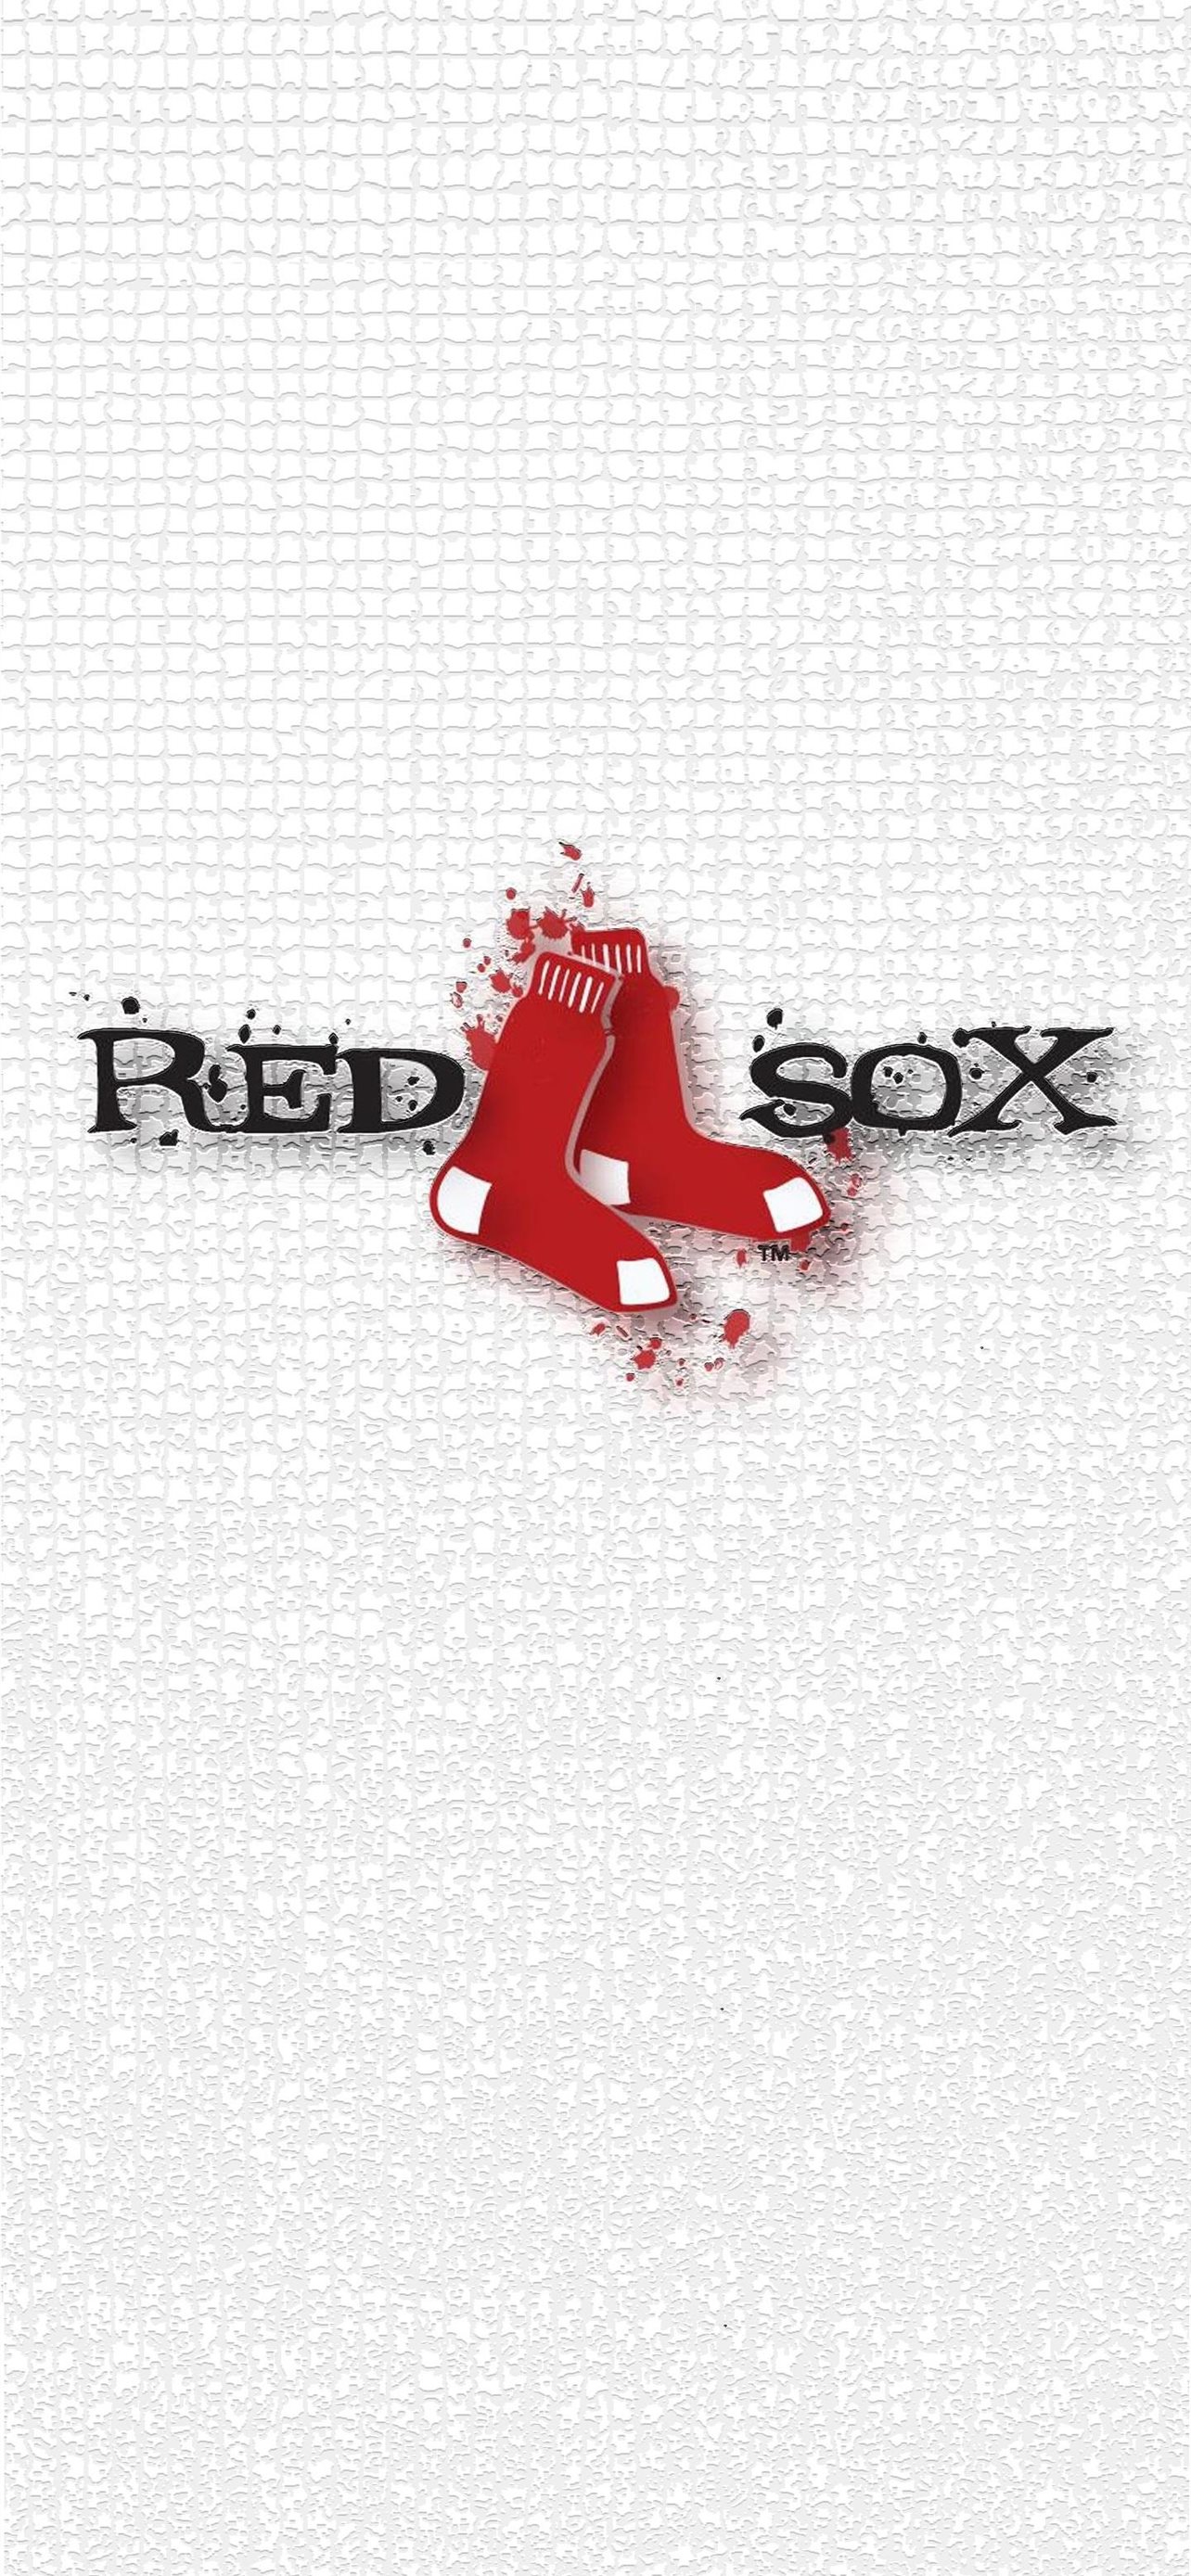 Red Sox on Twitter Represent this October with WinAdvanceRepeat  wallpapers  httpstcosBnjvlfbKJ  Twitter